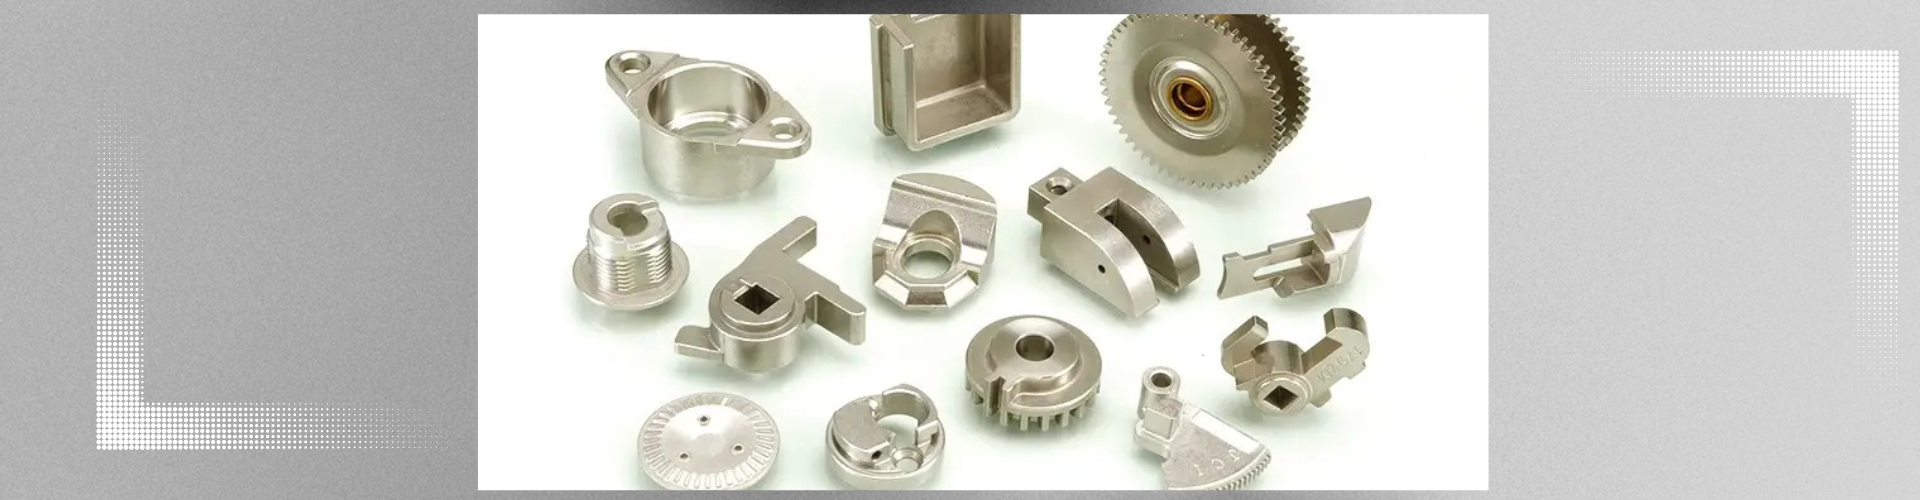 MIM Parts for Industrial and Tools